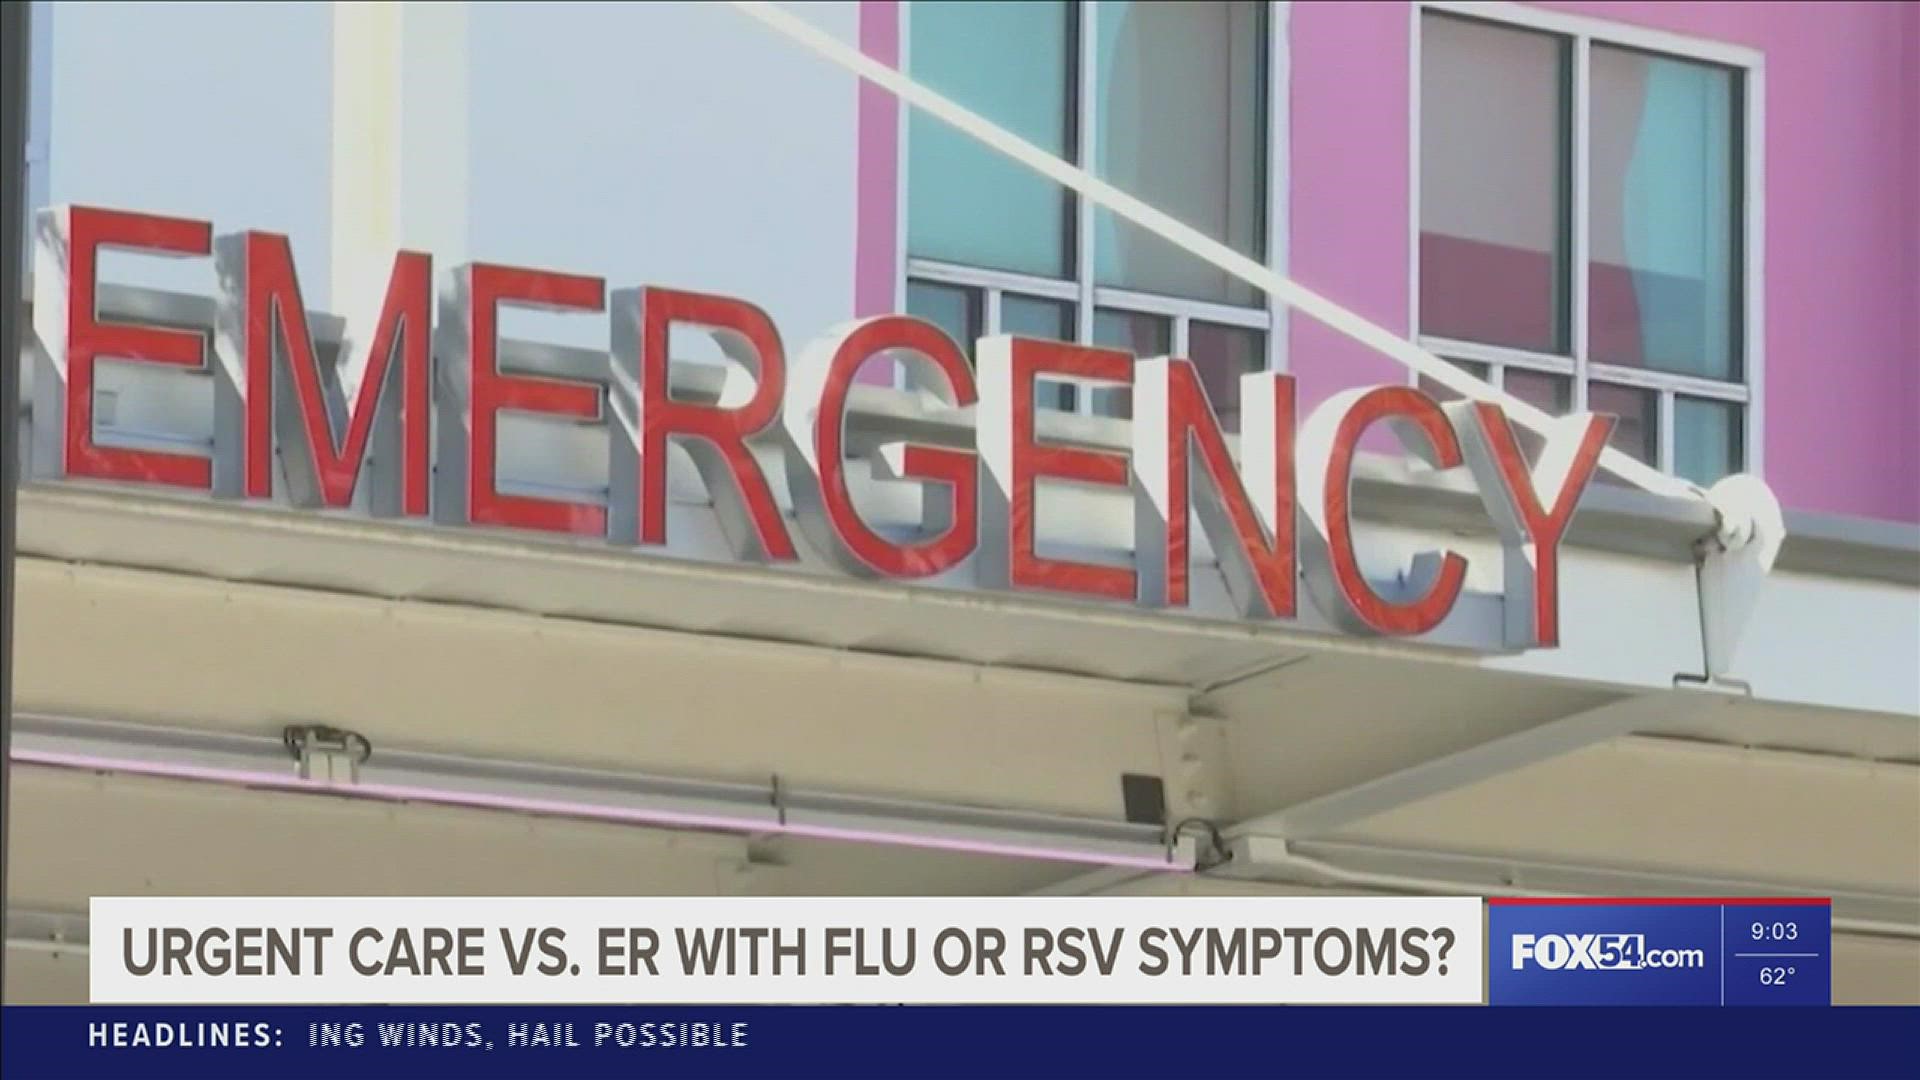 When should you visit an urgent care or emergency room for RSV or Flu infection symptoms?